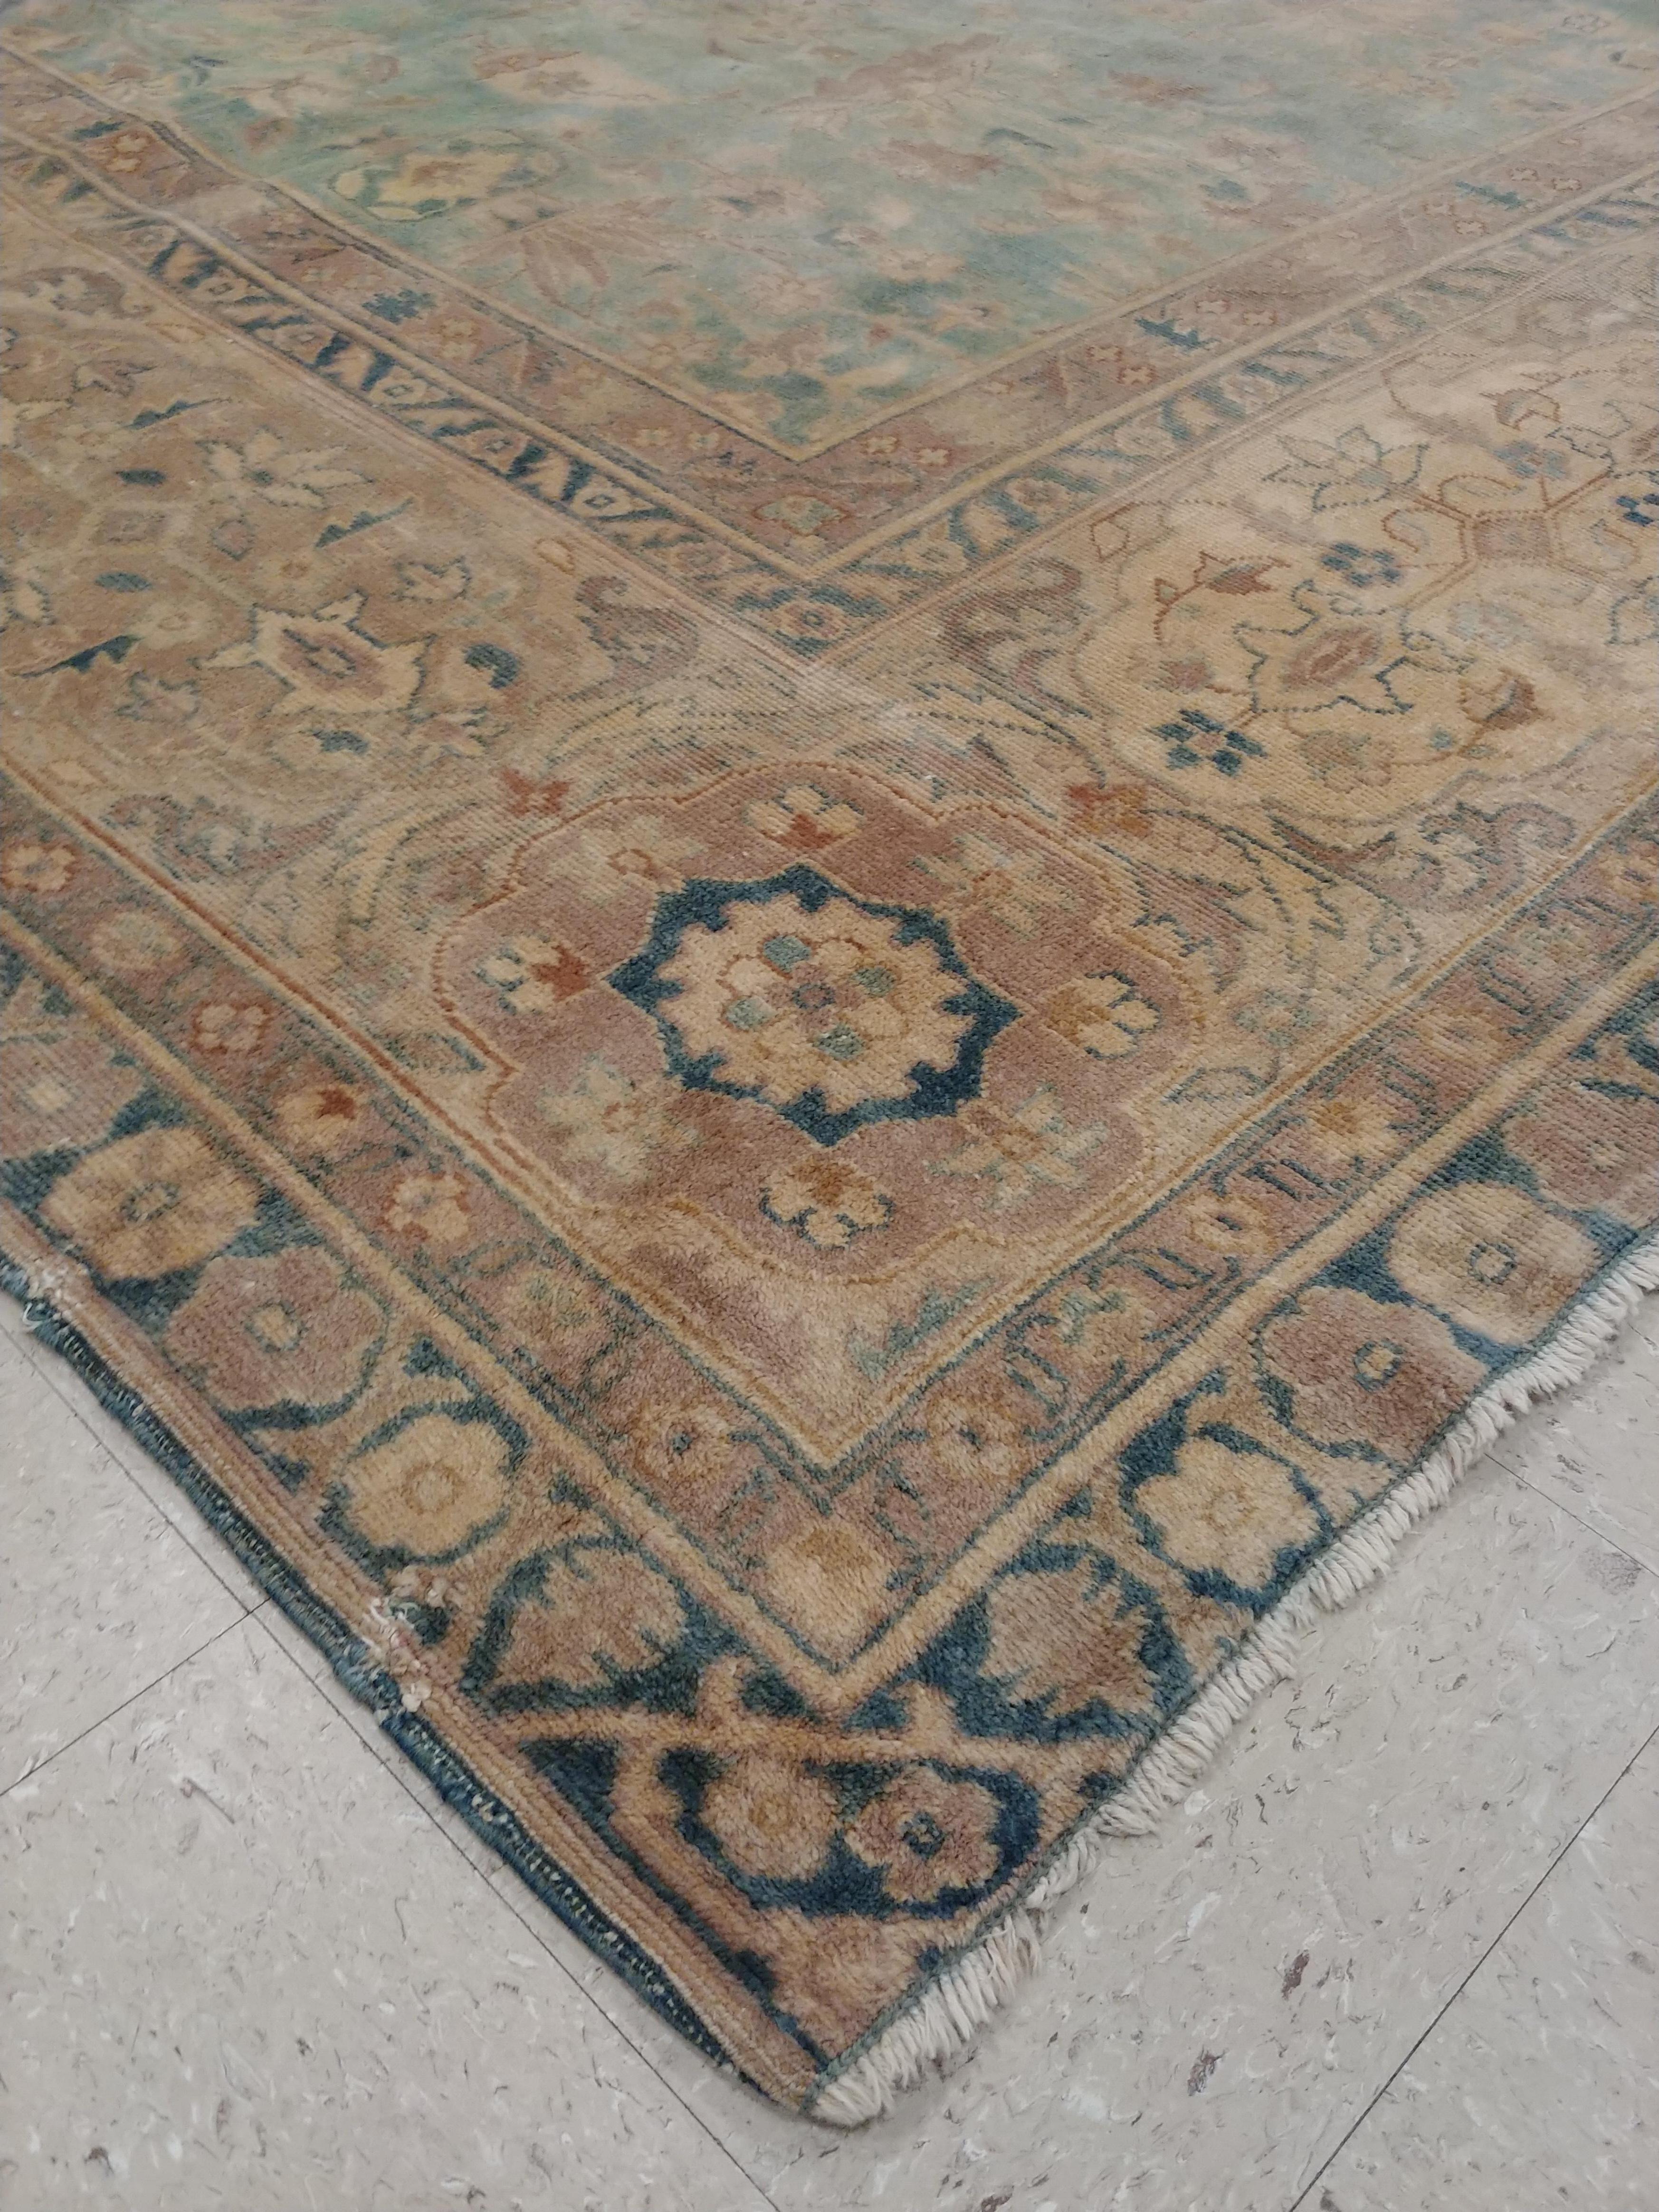 Antique Indian Agra Carpet, Handmade Rug, Green - Blue, Taupe, Beige, Allover In Fair Condition For Sale In Port Washington, NY